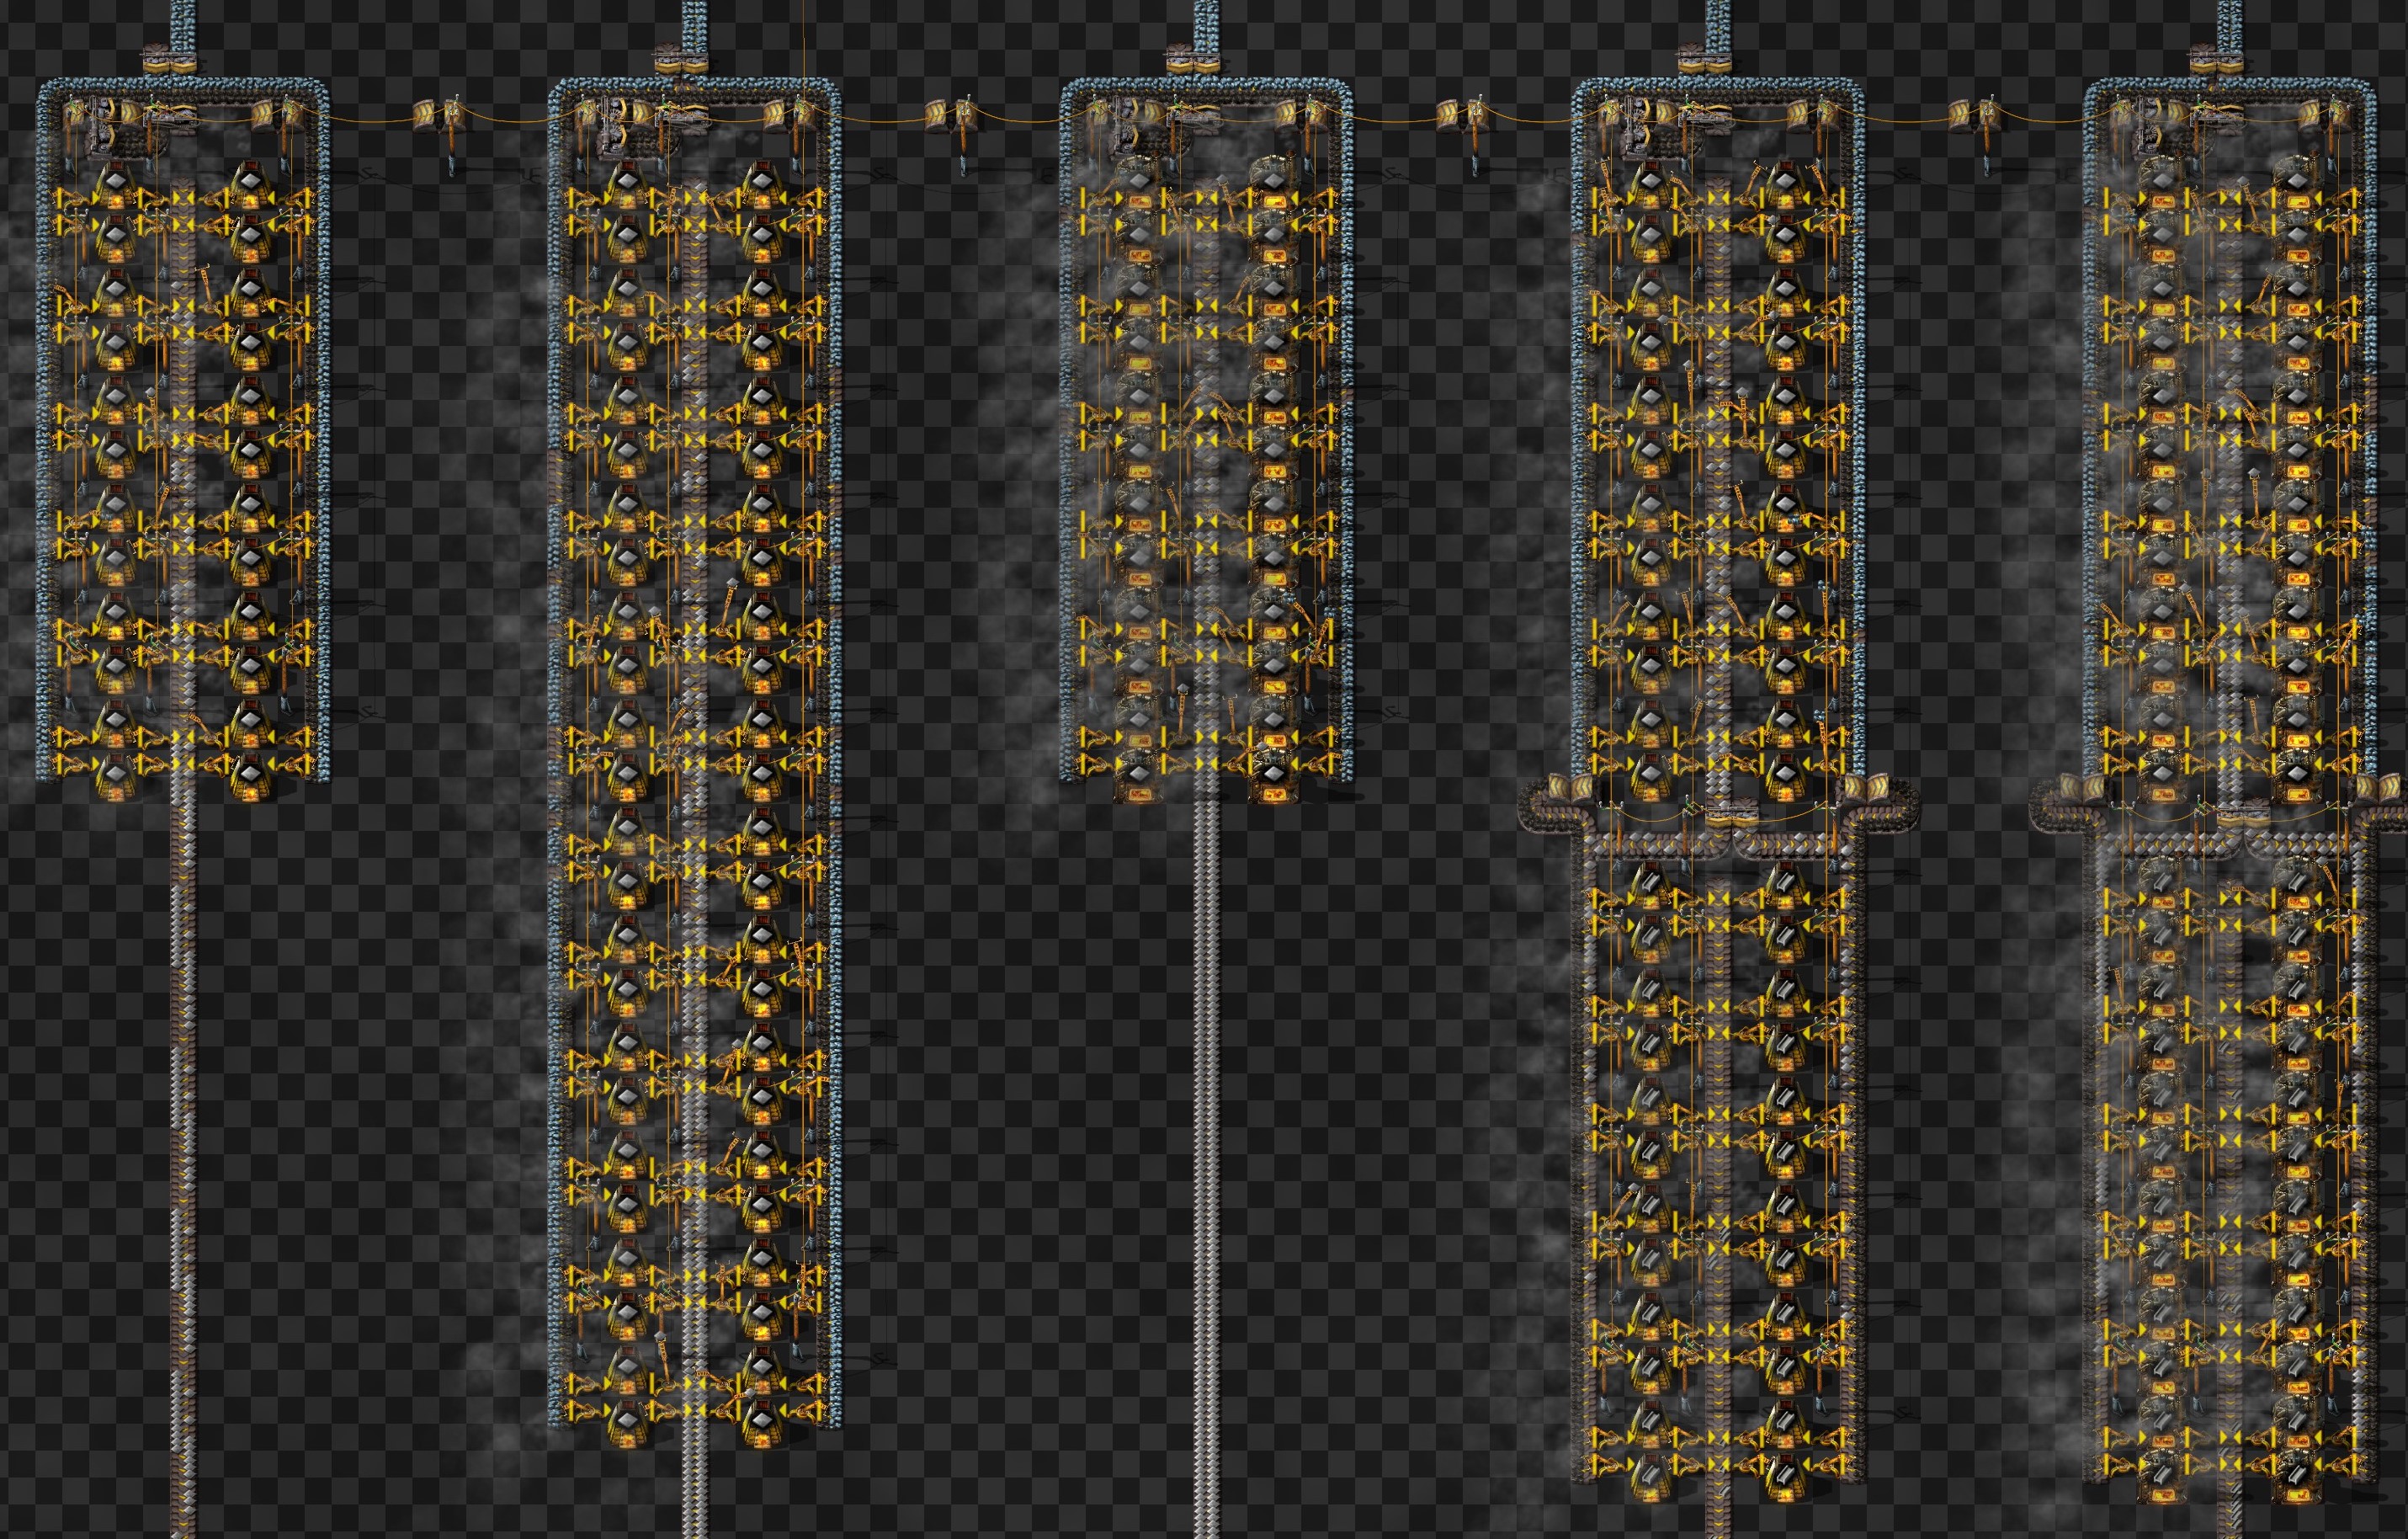 Blueprints for early, mid and lategame (updated) image 1